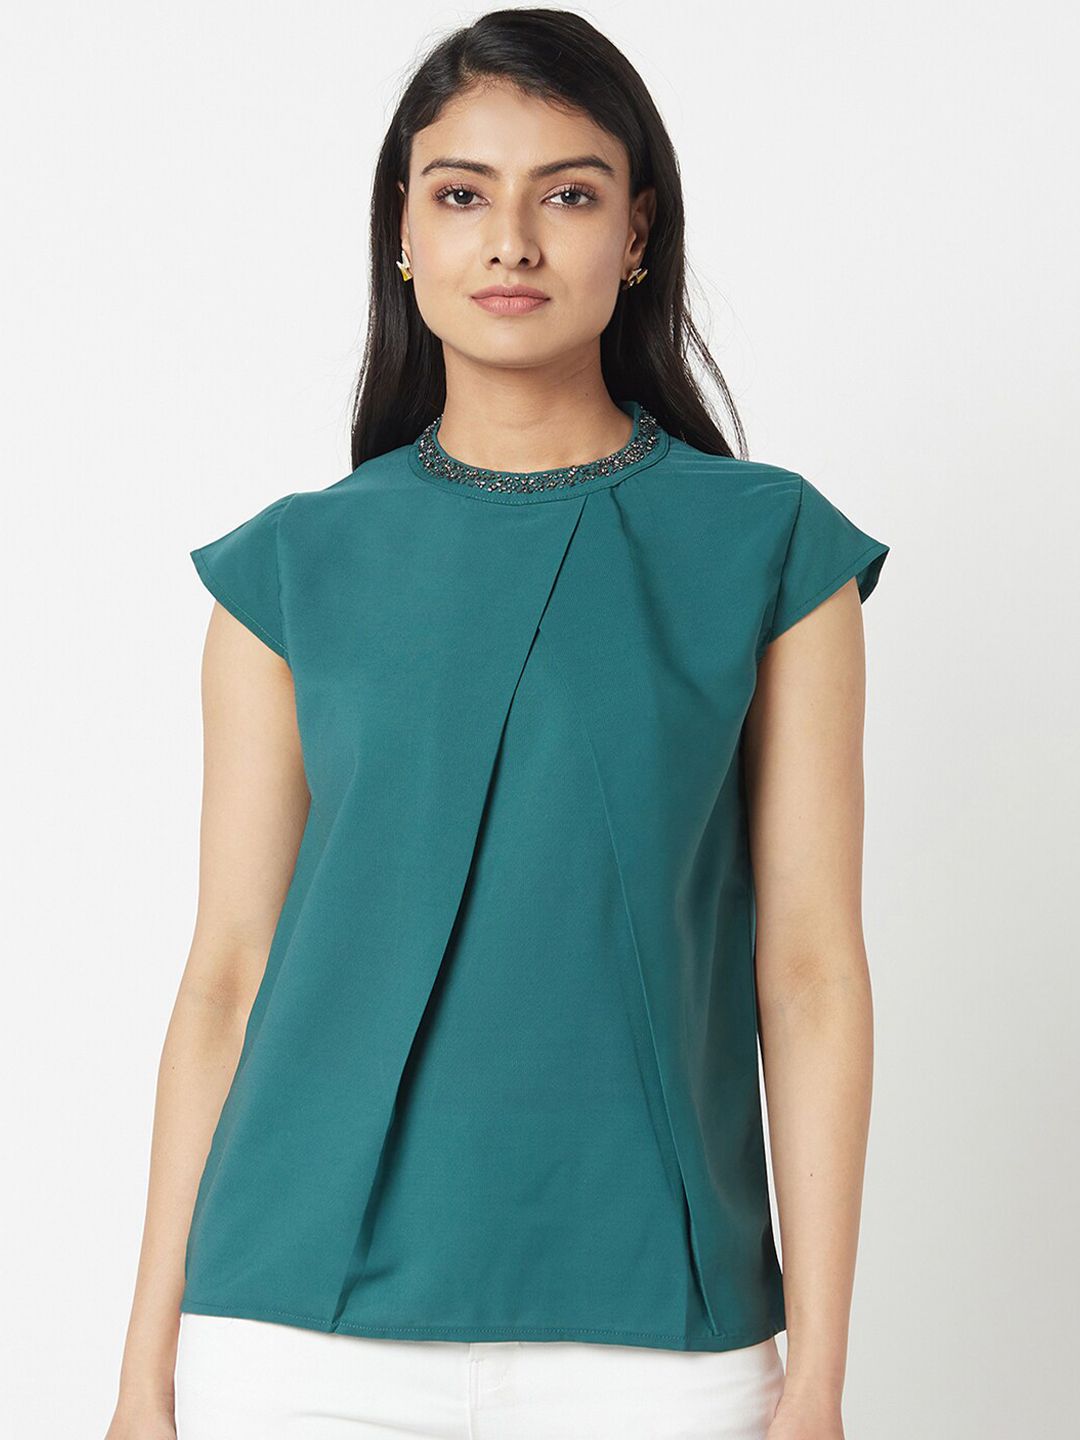 Miss Women Grace Green Solid Top Price in India